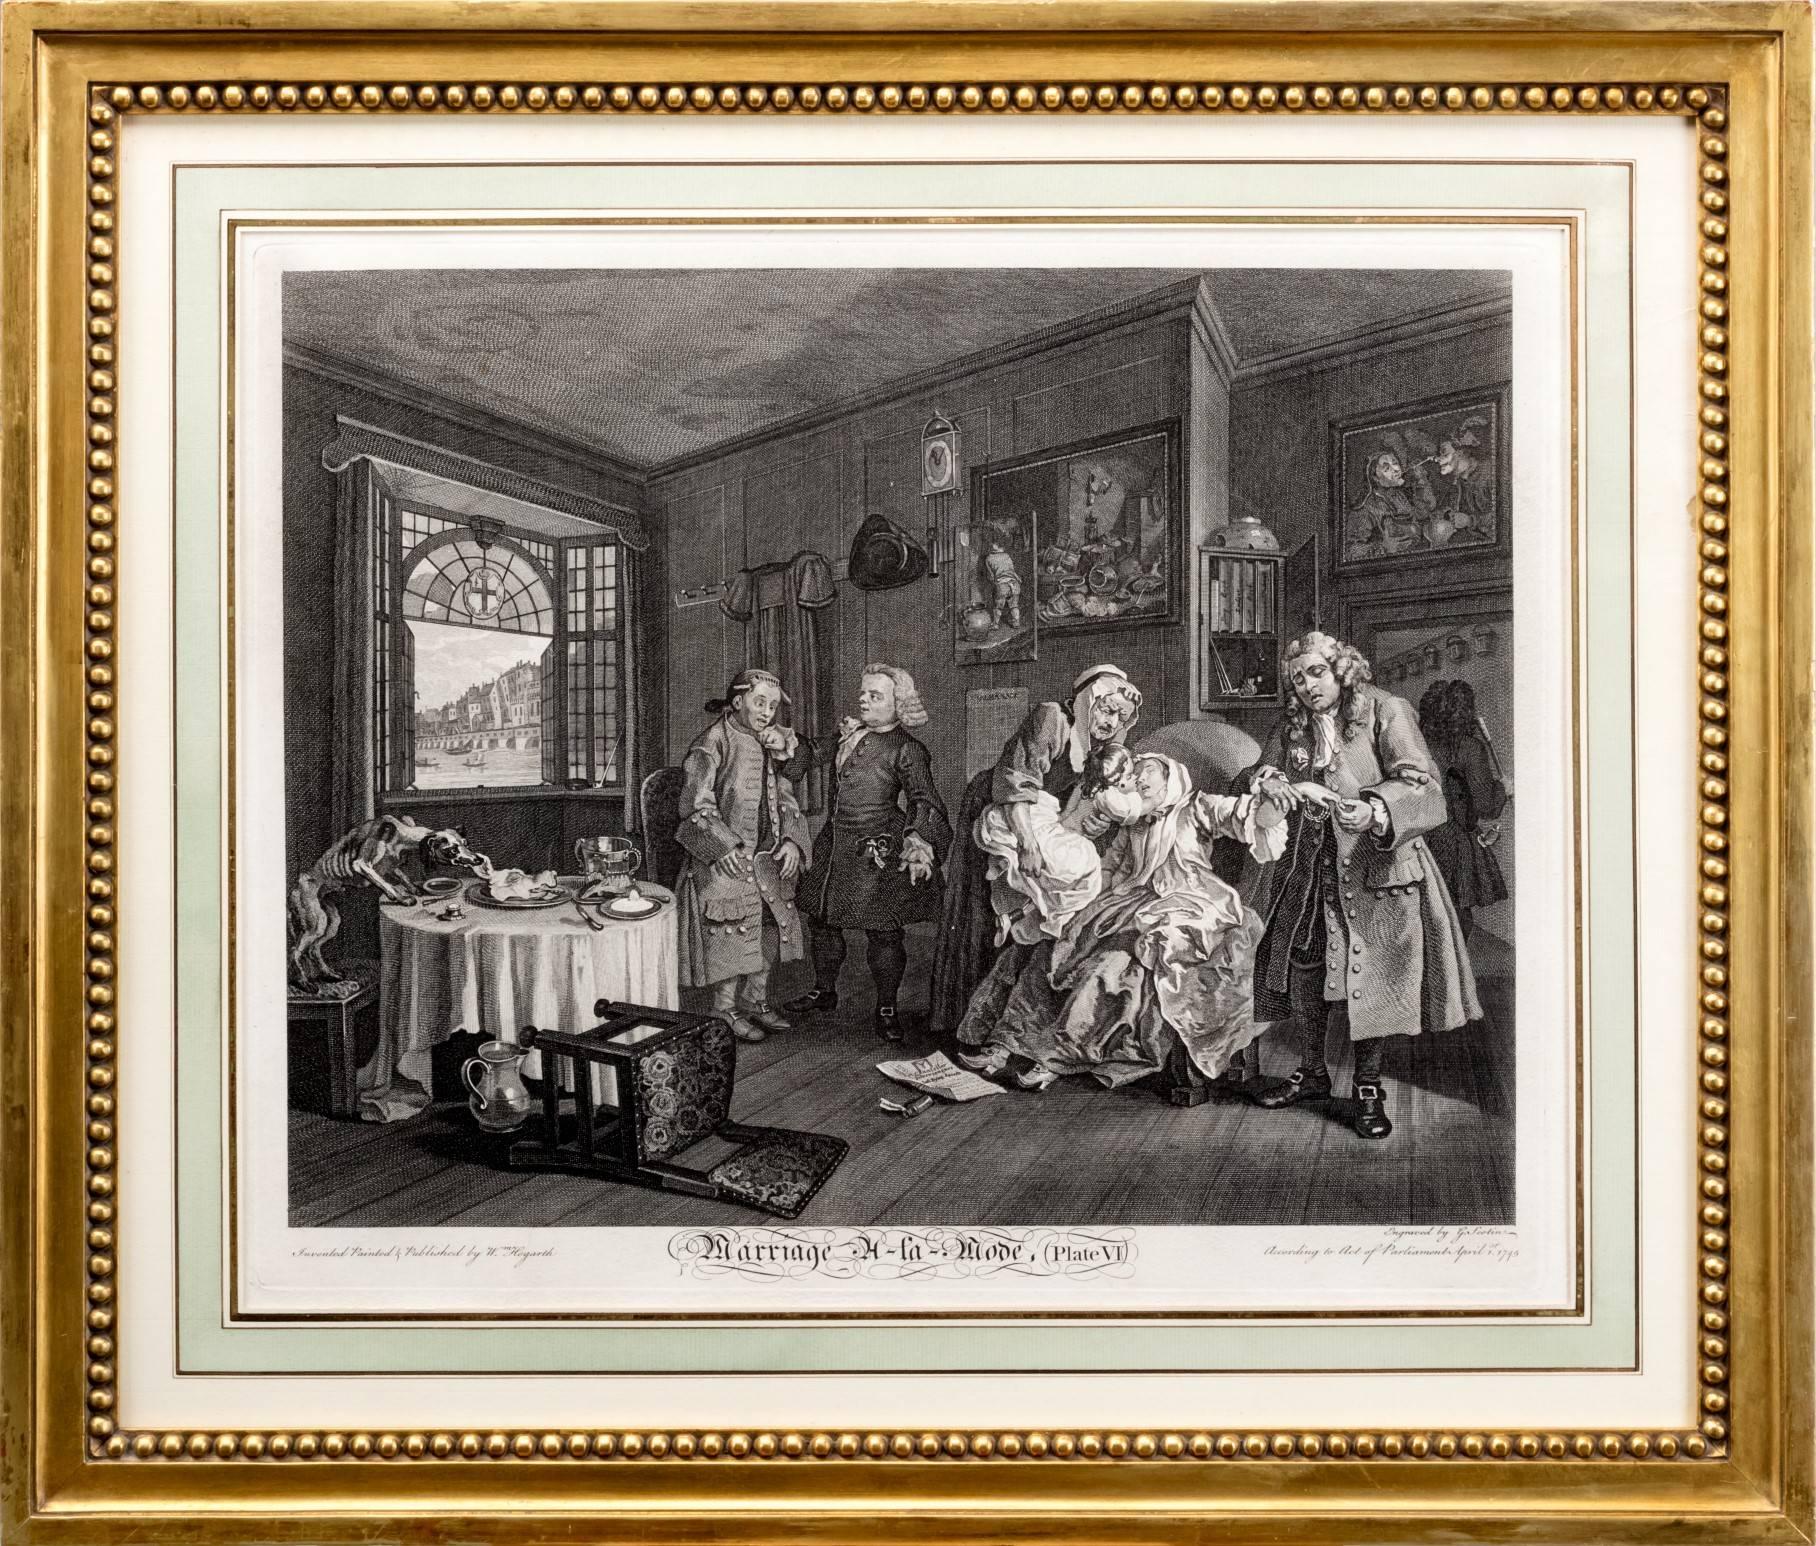 Marriage à la Mode.

1. Plate I - The Marriage Contract.
2. Plate II - The Breakfast Scene.
3. Plate III - The Scene with the Quack.
4. Plate IV - The Countess’s Levee.
5. Plate V - The Death of the Earl.
6. Plate VI - The Death of the